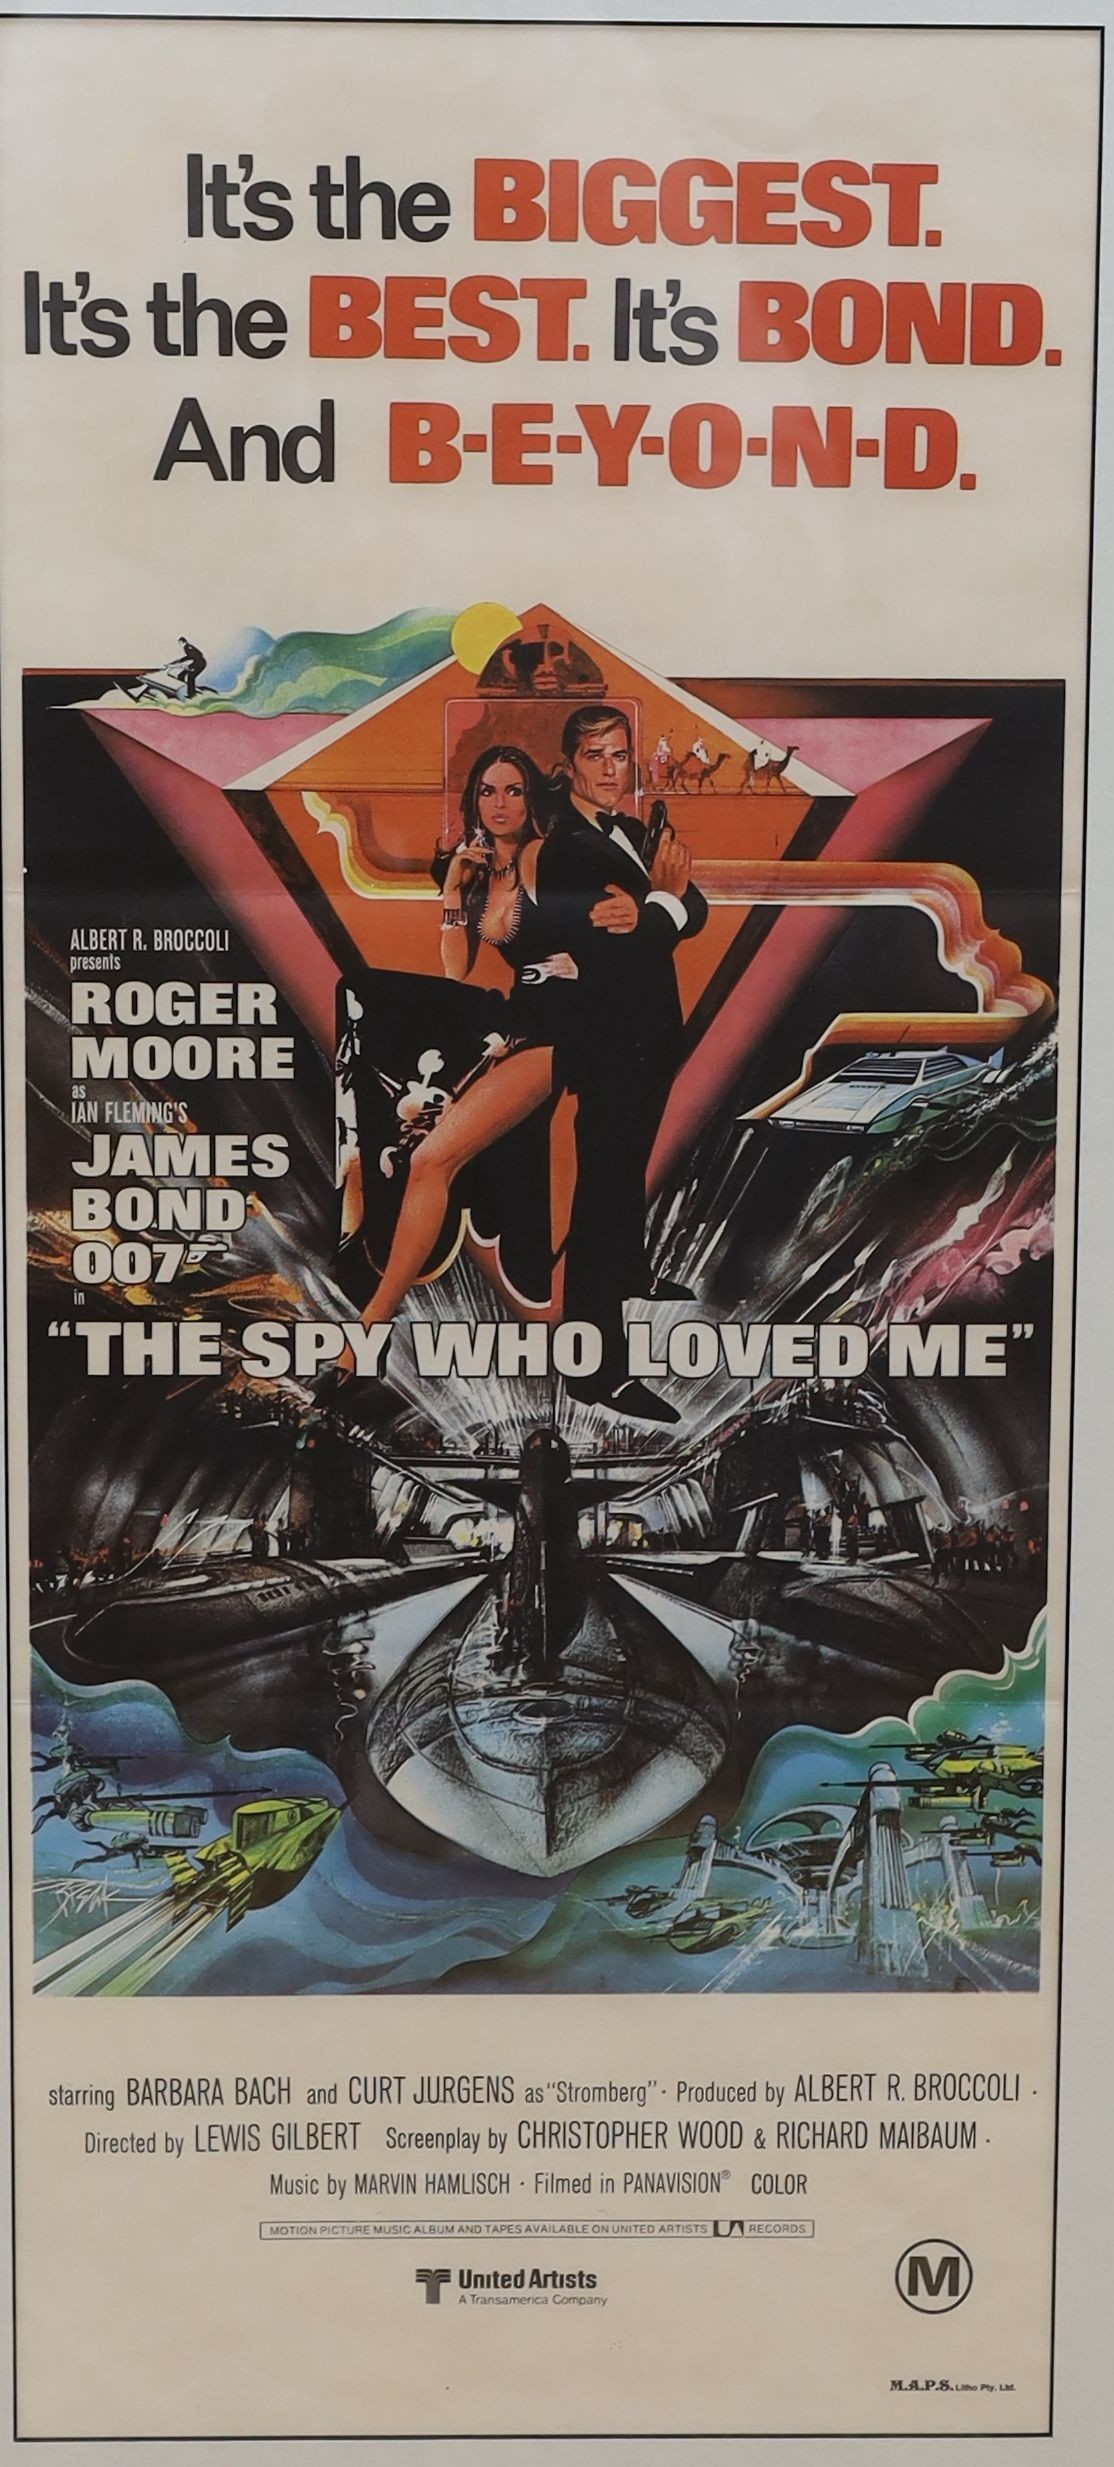 James Bond. Three assorted film posters: Never Say Never Again, 75 x 100cm; Moonraker, 55 x 70cm and The Spy Who Loved Me, 75 x 33cm